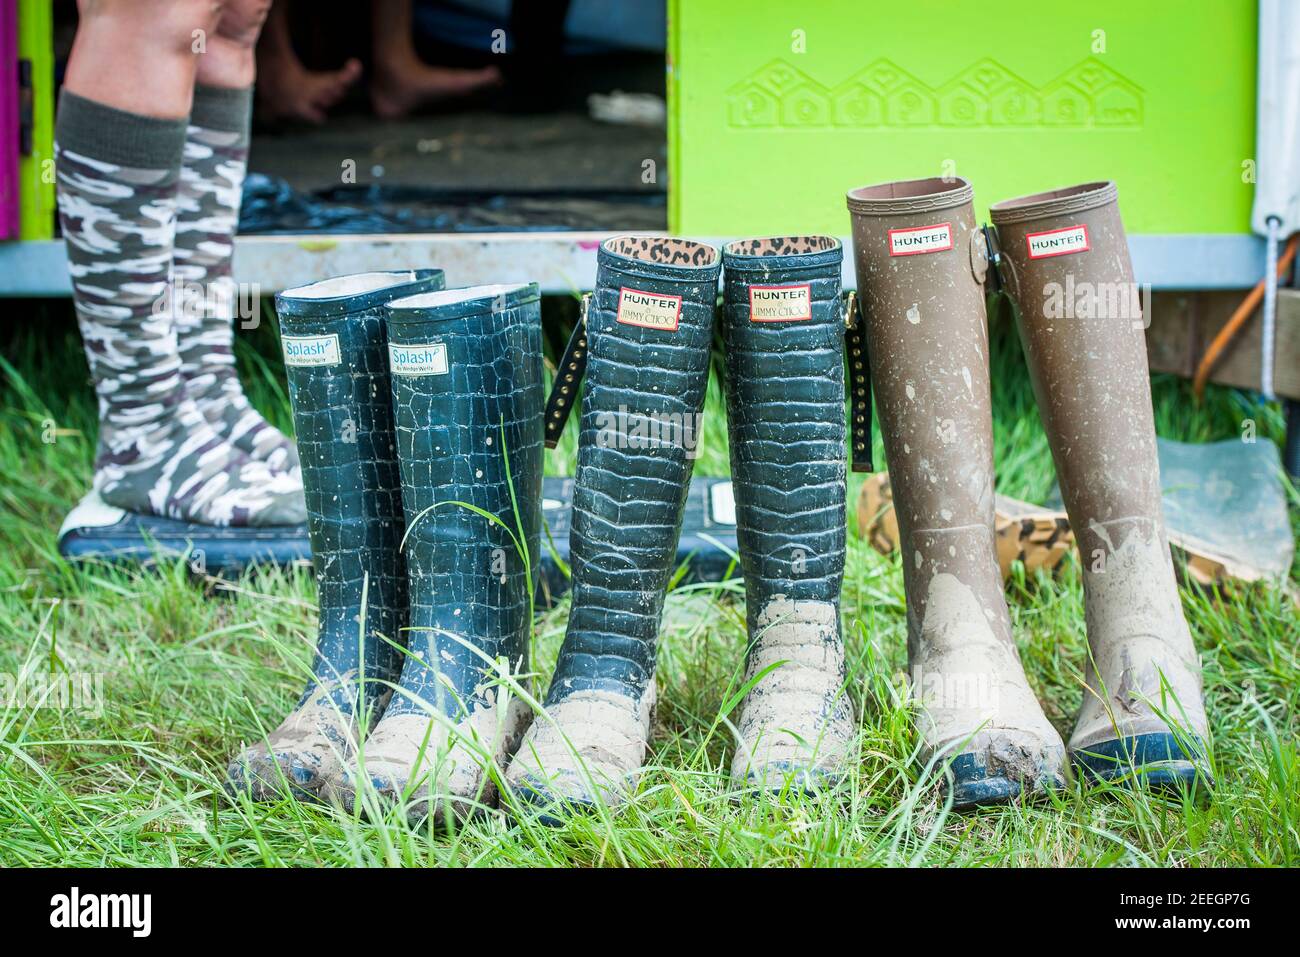 General view of Jimmy Choo Hunter wellies on day 2 of the Isle of Wight  Festival